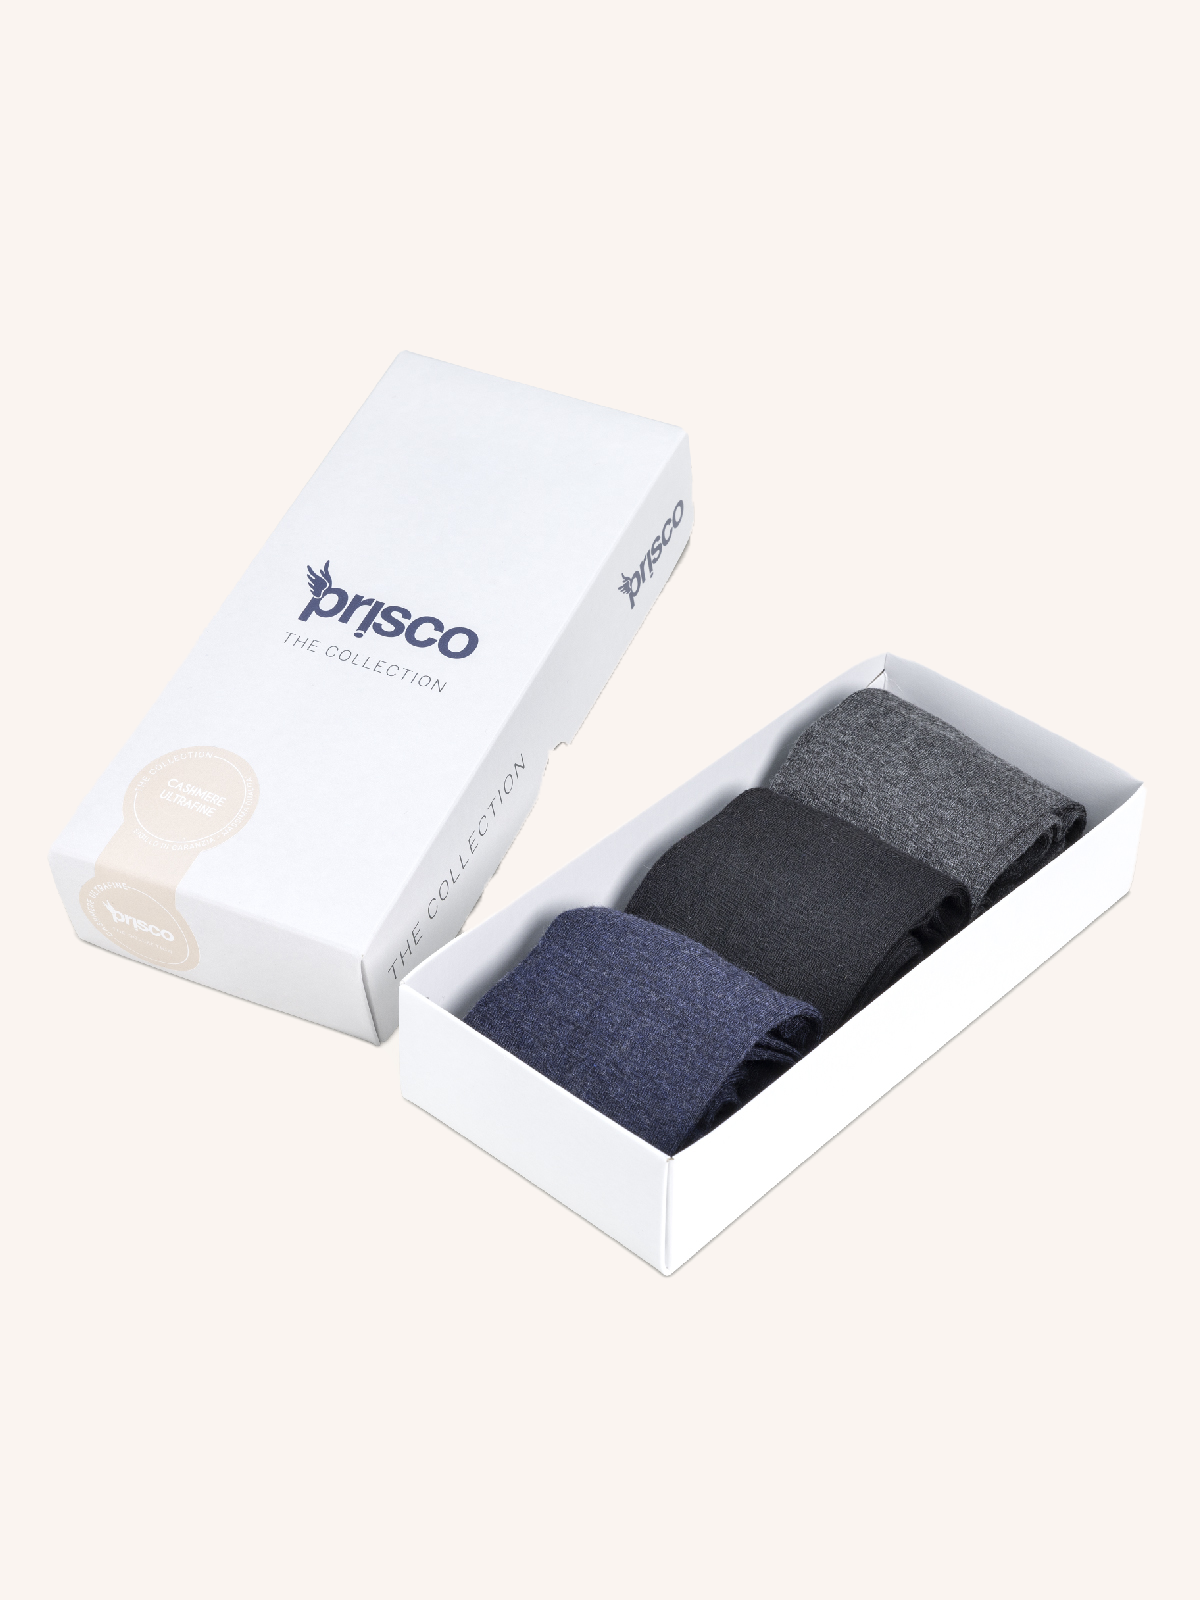 Short Socks in Cashmere and Viscose for Women | Plain Color | Pack of 3 Pairs | Ultra DC 